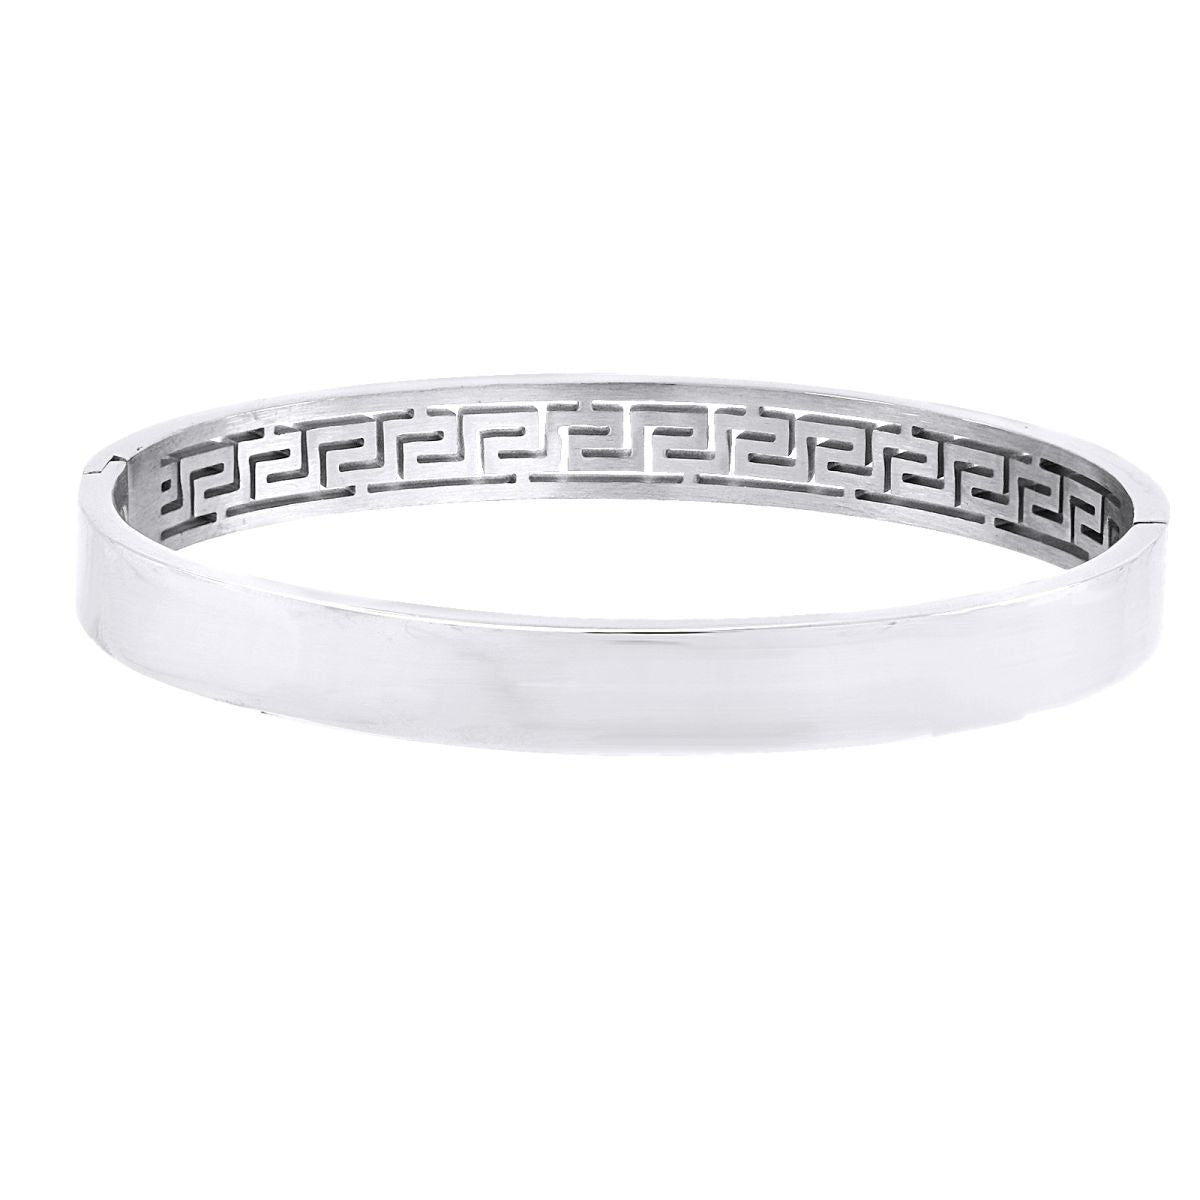 Amazon.com: Feinny Vintage Buddha Statue Cuff Bangle, 110g Heavy  Hypoallergenic 999 Sterling Silver Handmade Arm Ring Bracelet, Men Charm  Ethnic Religious Belief Jewelry Wristband : Clothing, Shoes & Jewelry